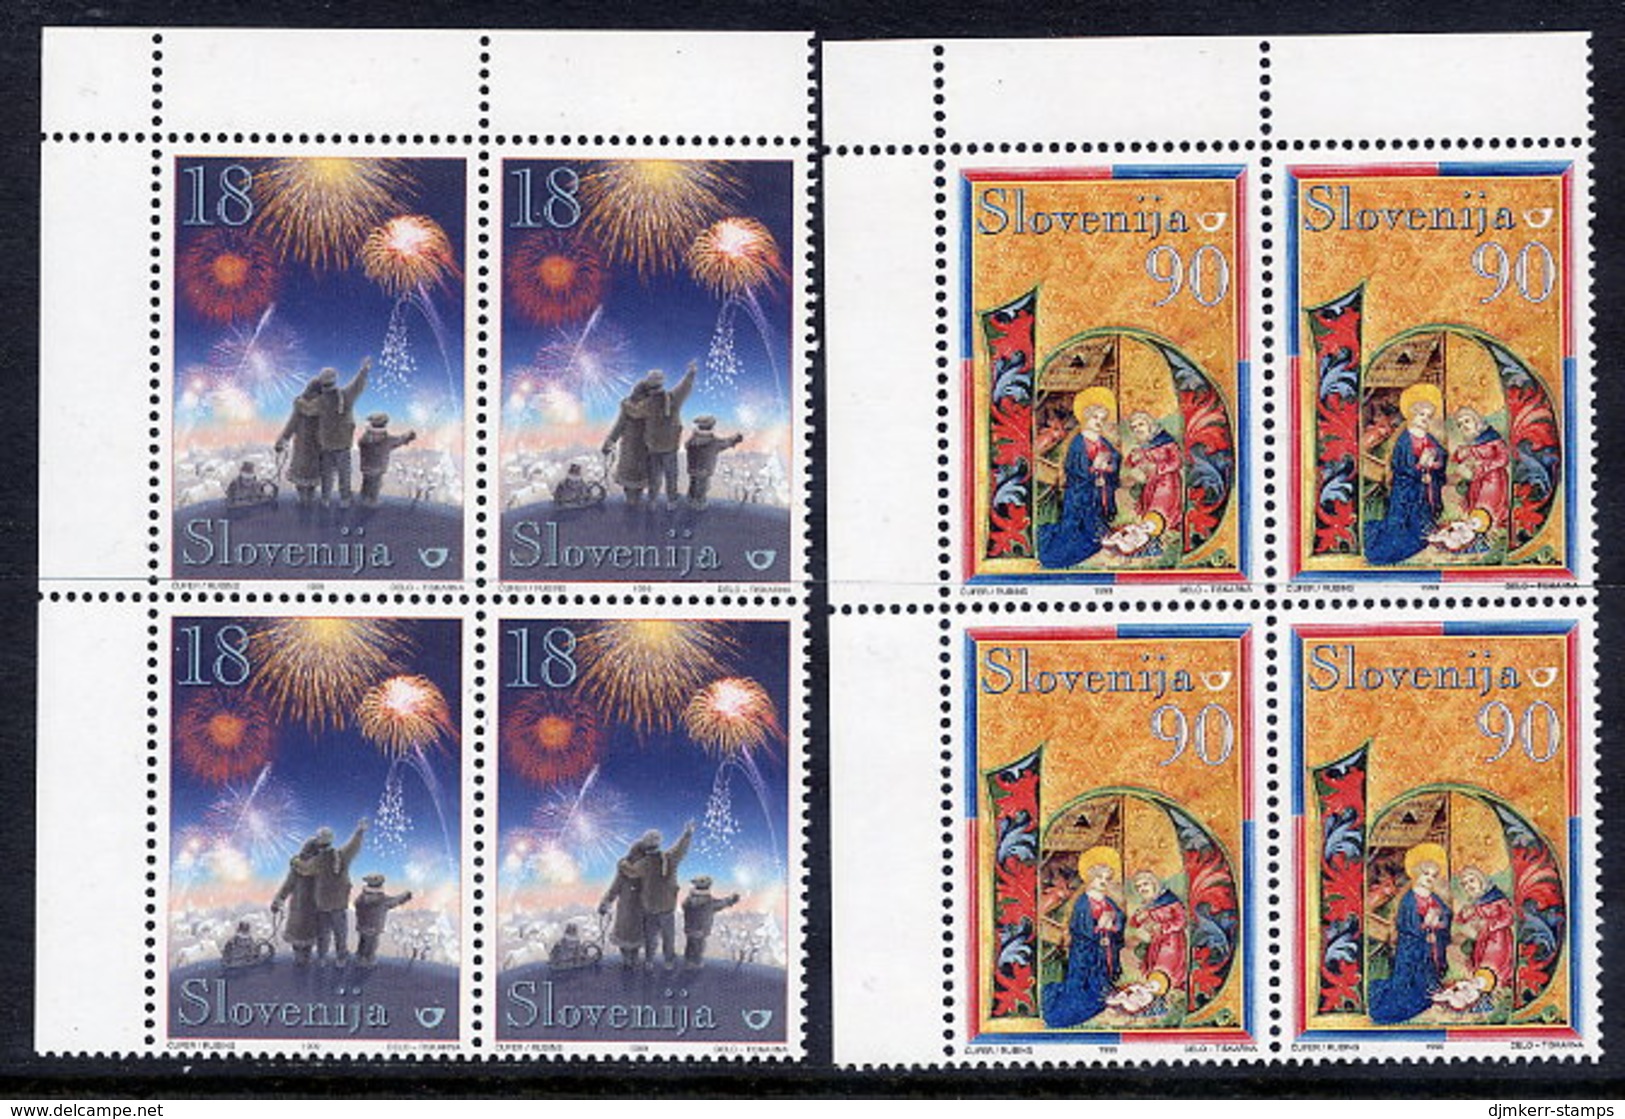 SLOVENIA 1999 Christmas 18 T. And 90 T. From Sheets Blocks Of 4 MNH / **.  Michel 277, 279 - Slowenien